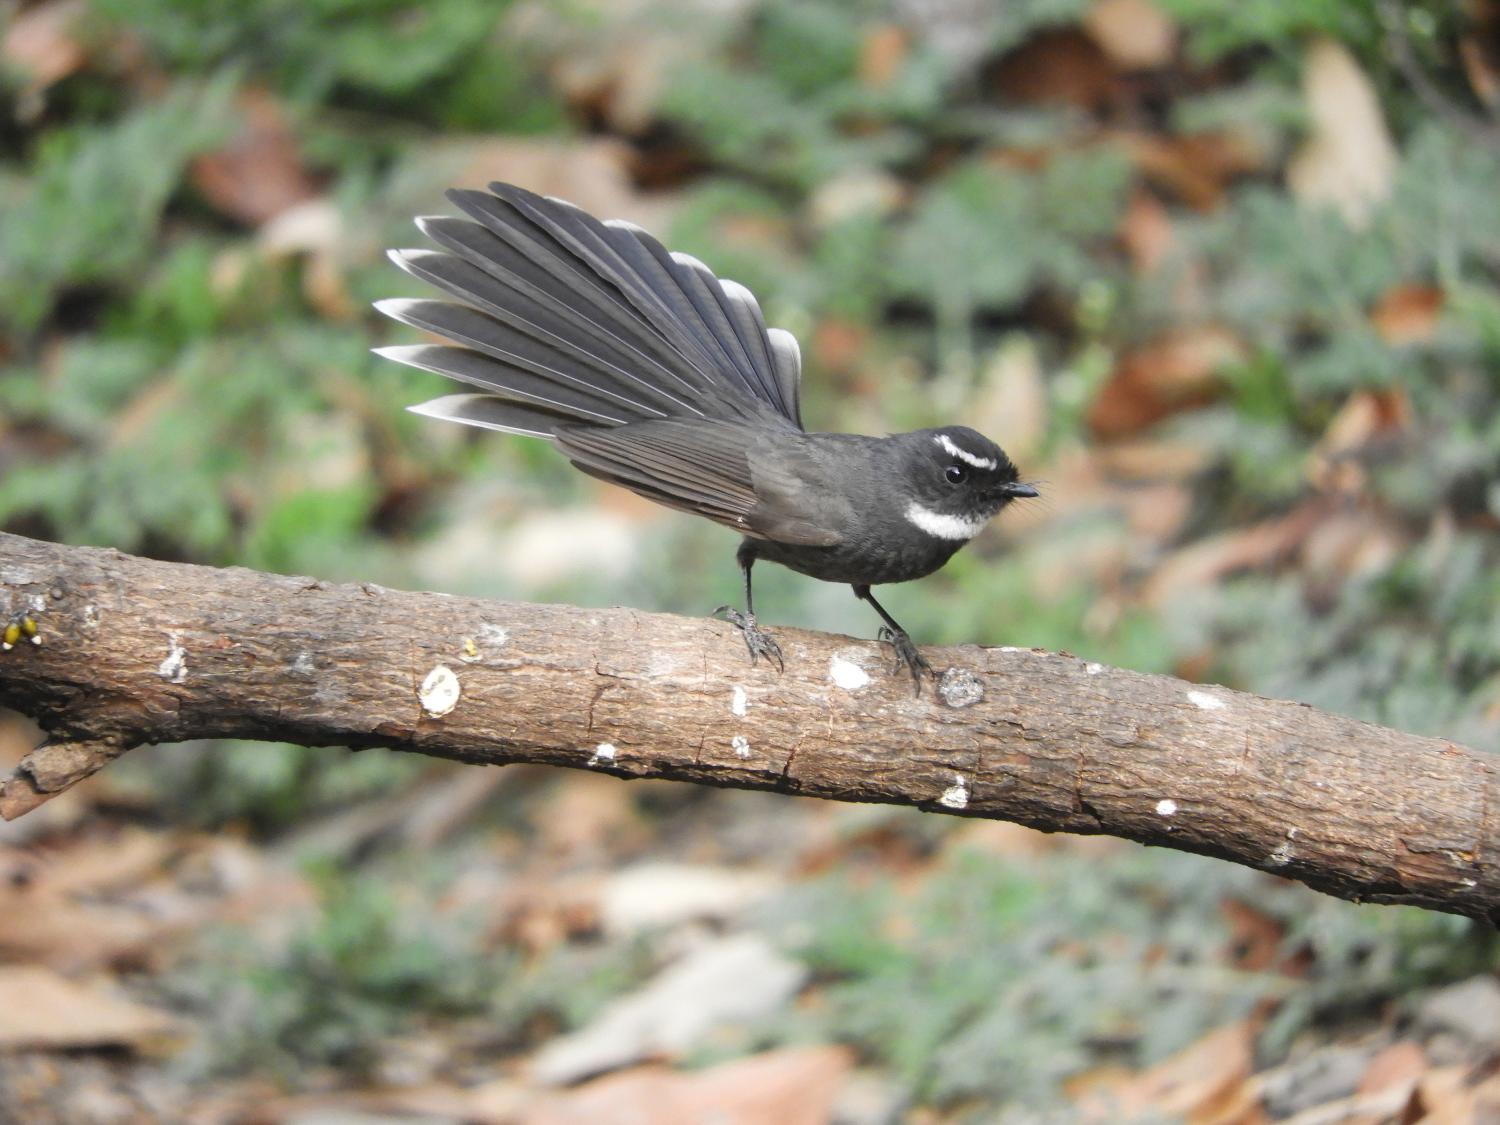 Image of White-throated Fantail